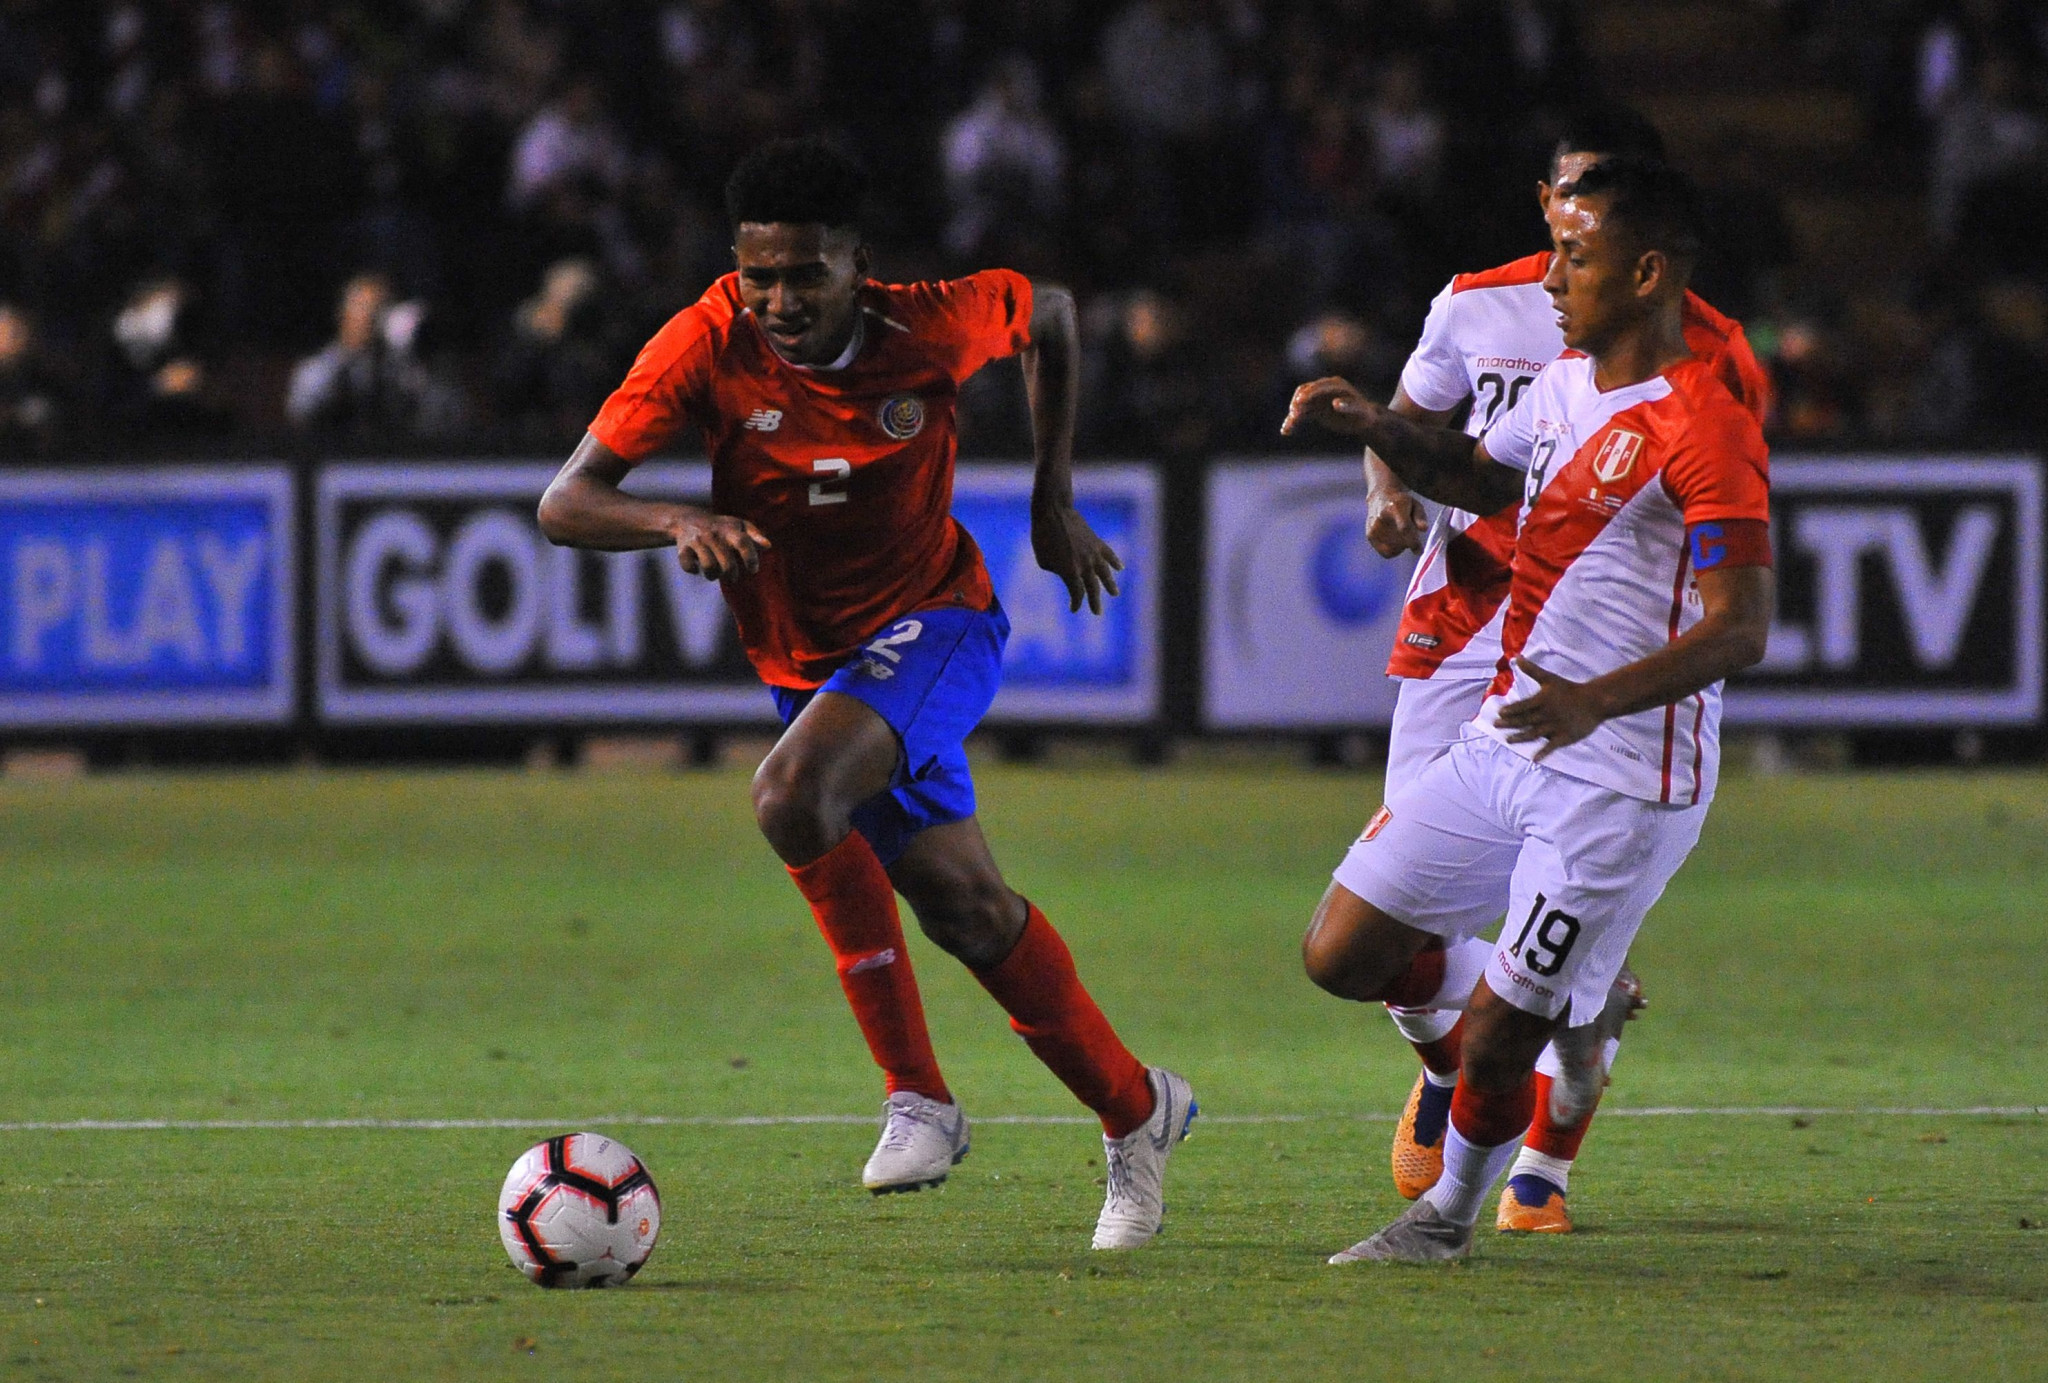 Costa Rica will host two games of the CONCACAF Gold Cup next year ©Getty Images